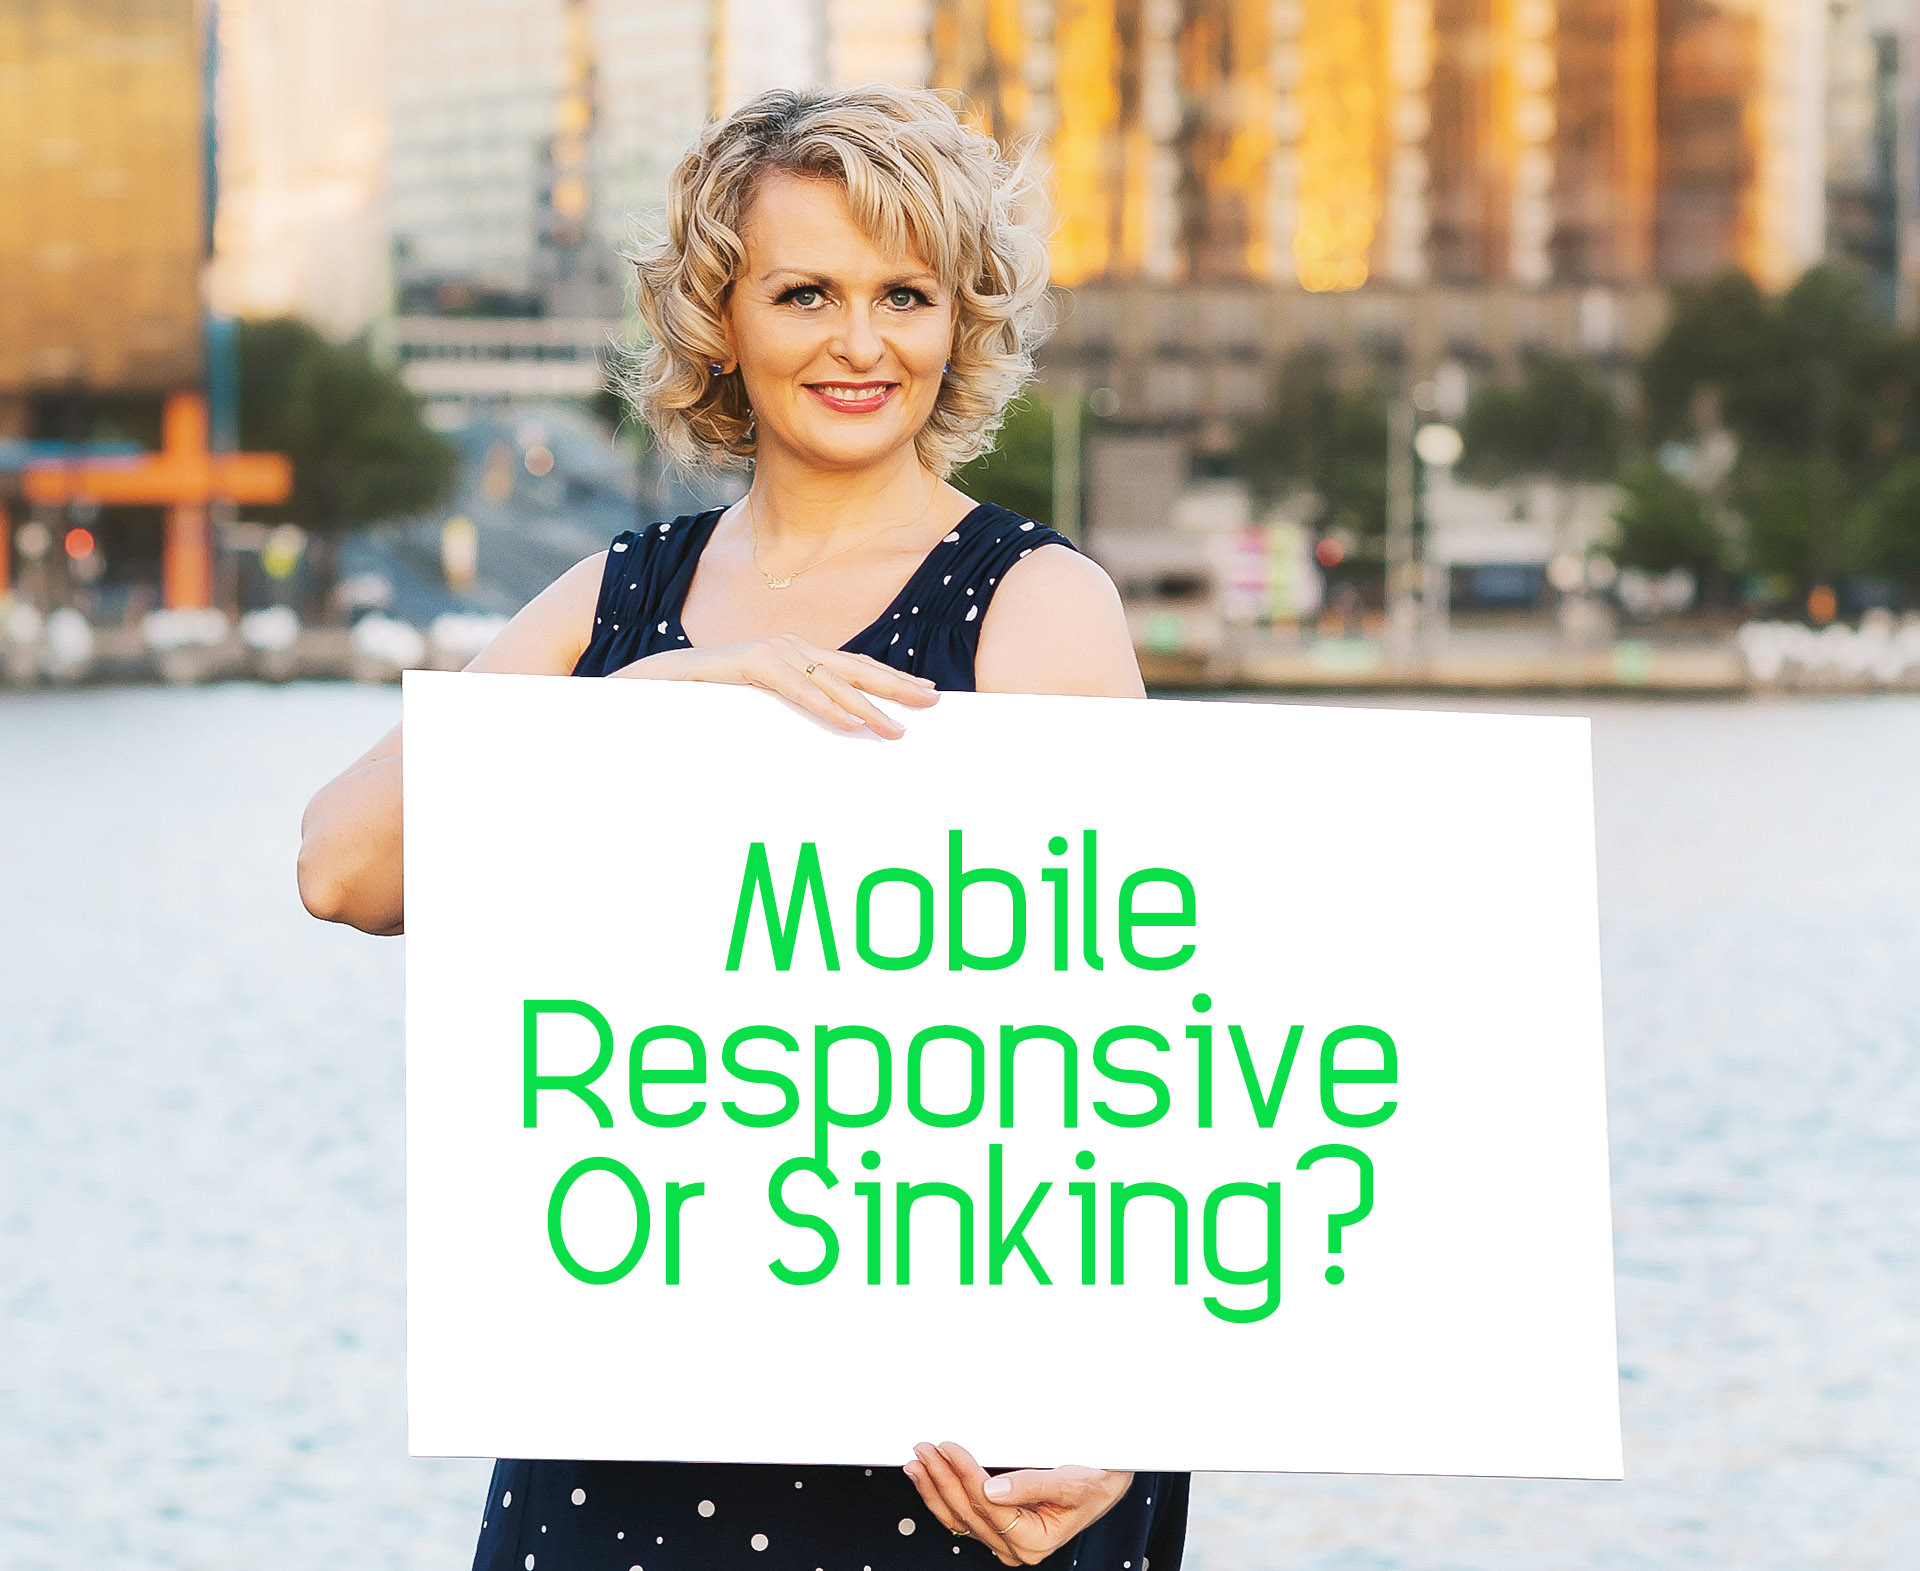 Google rankings drop unless you have a mobile responsive website